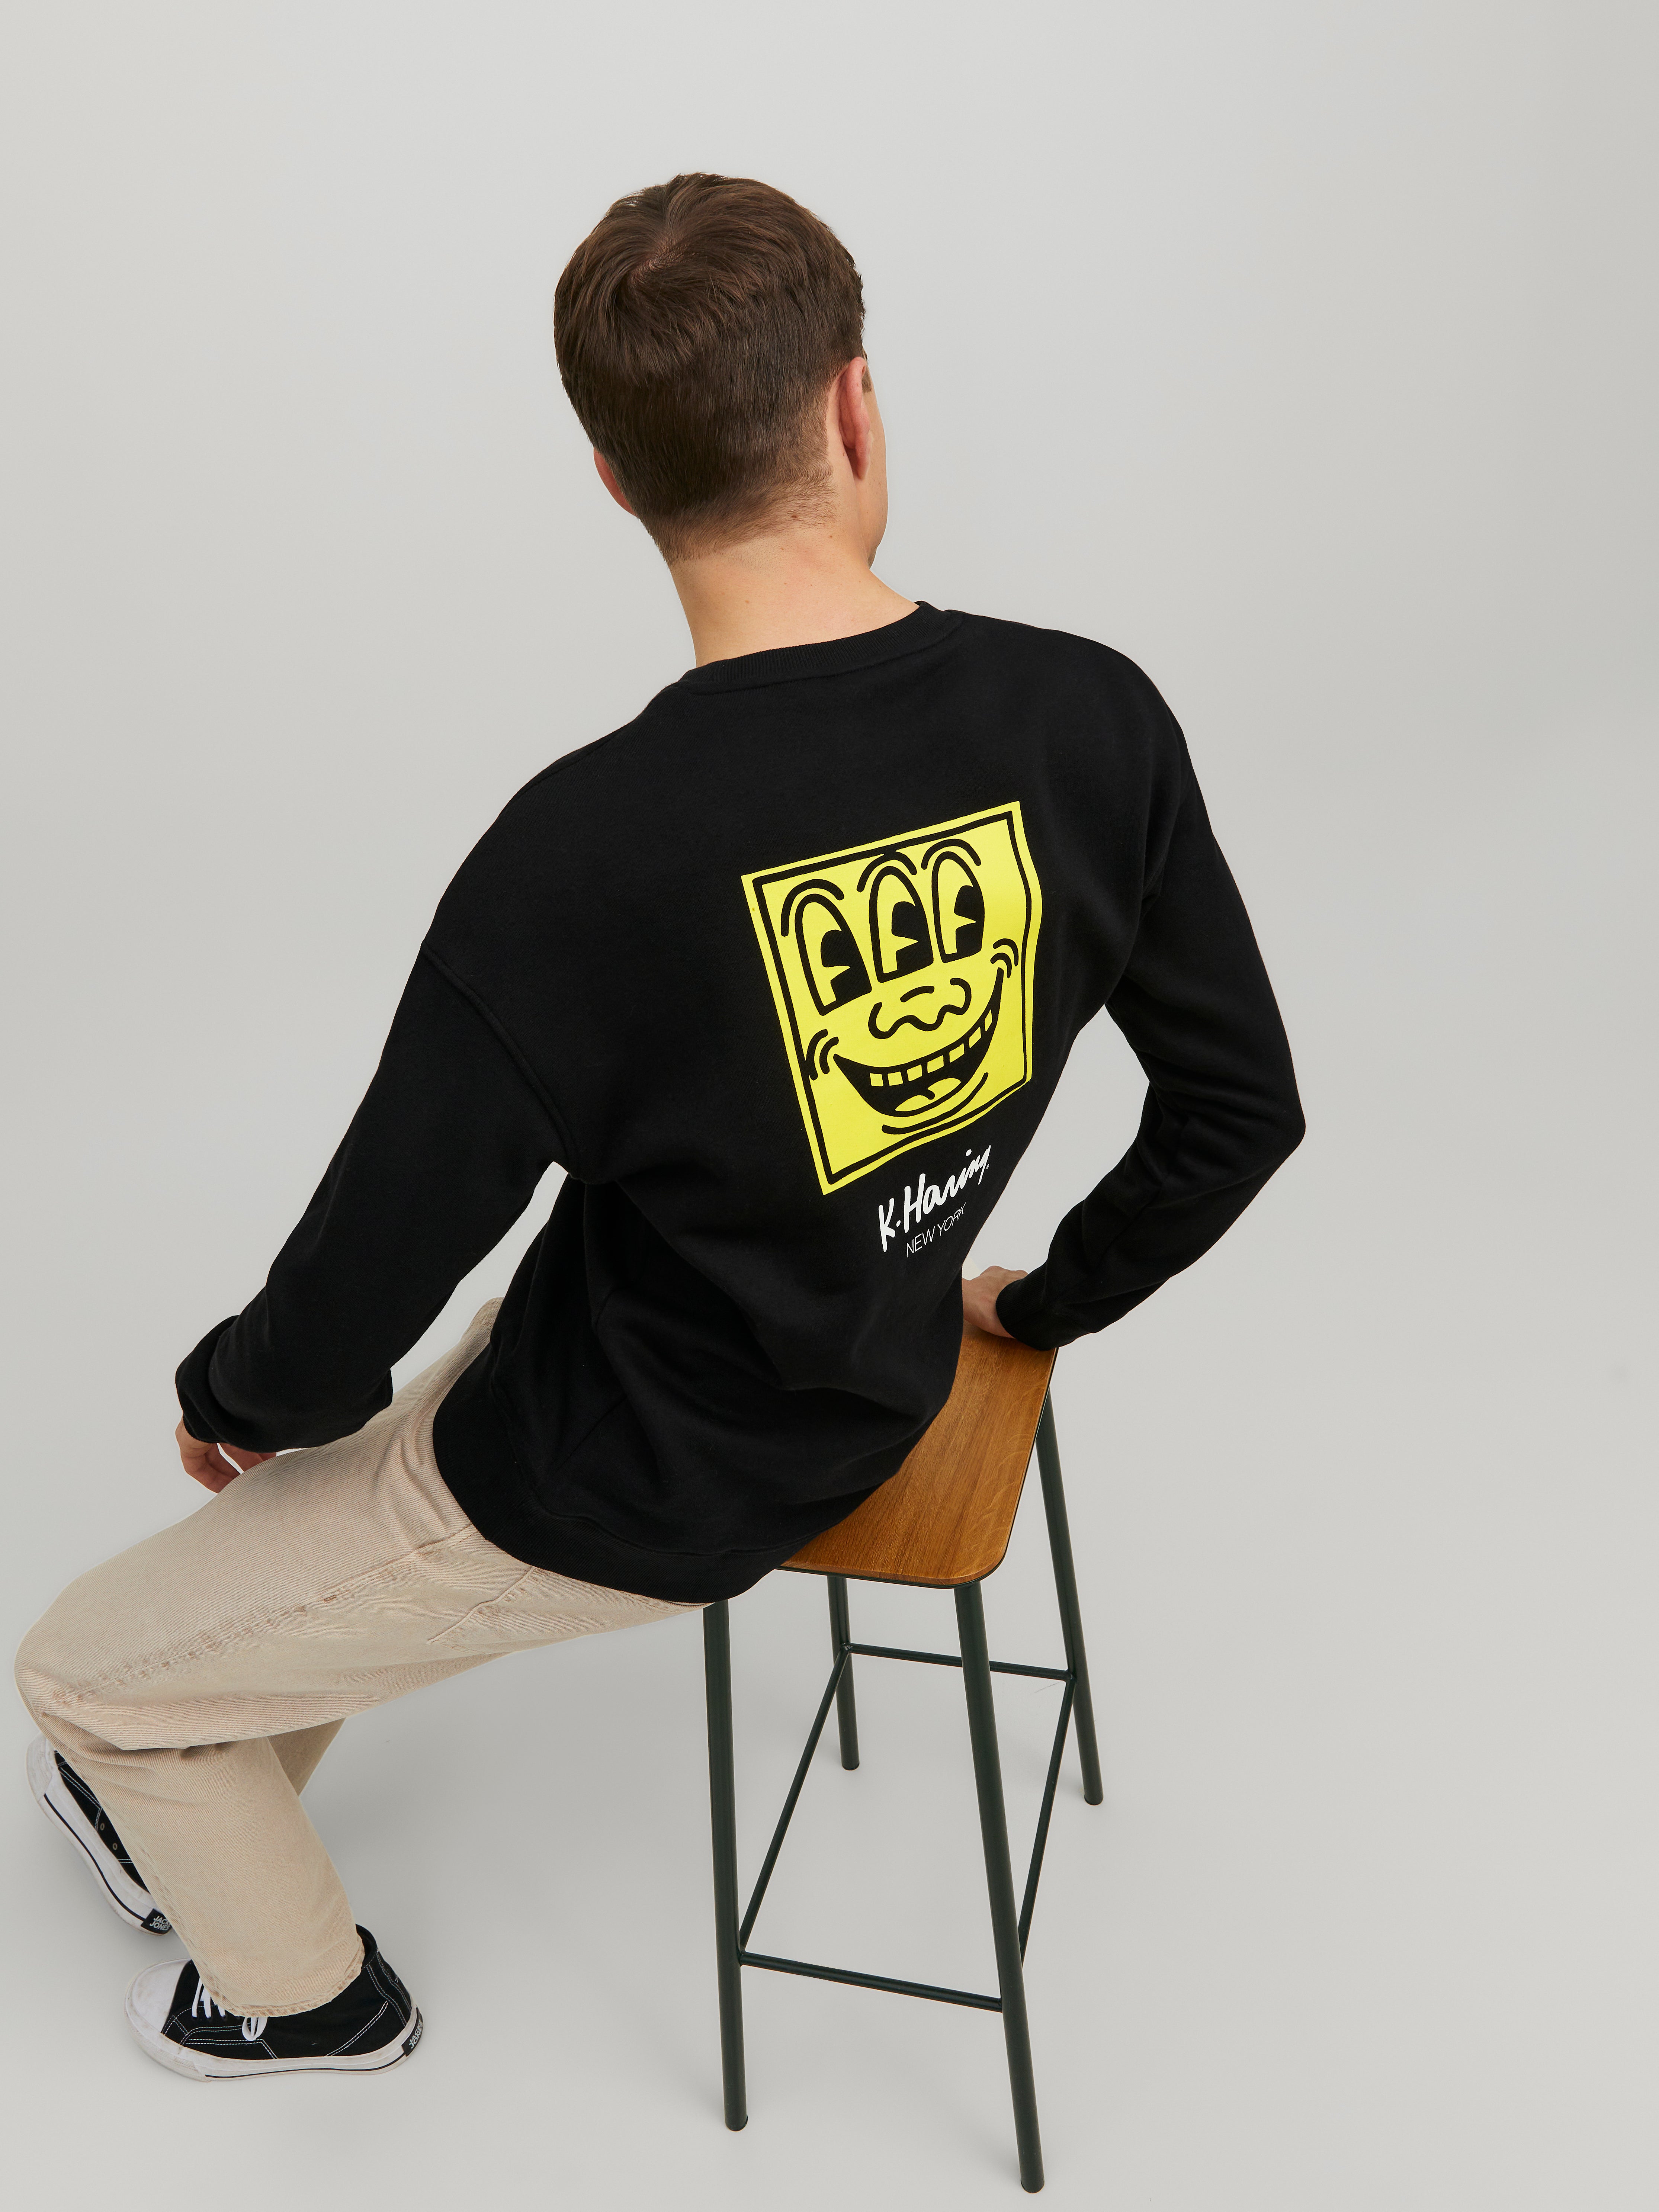 Keith Haring Printed Crew neck Sweatshirt with 70% discount